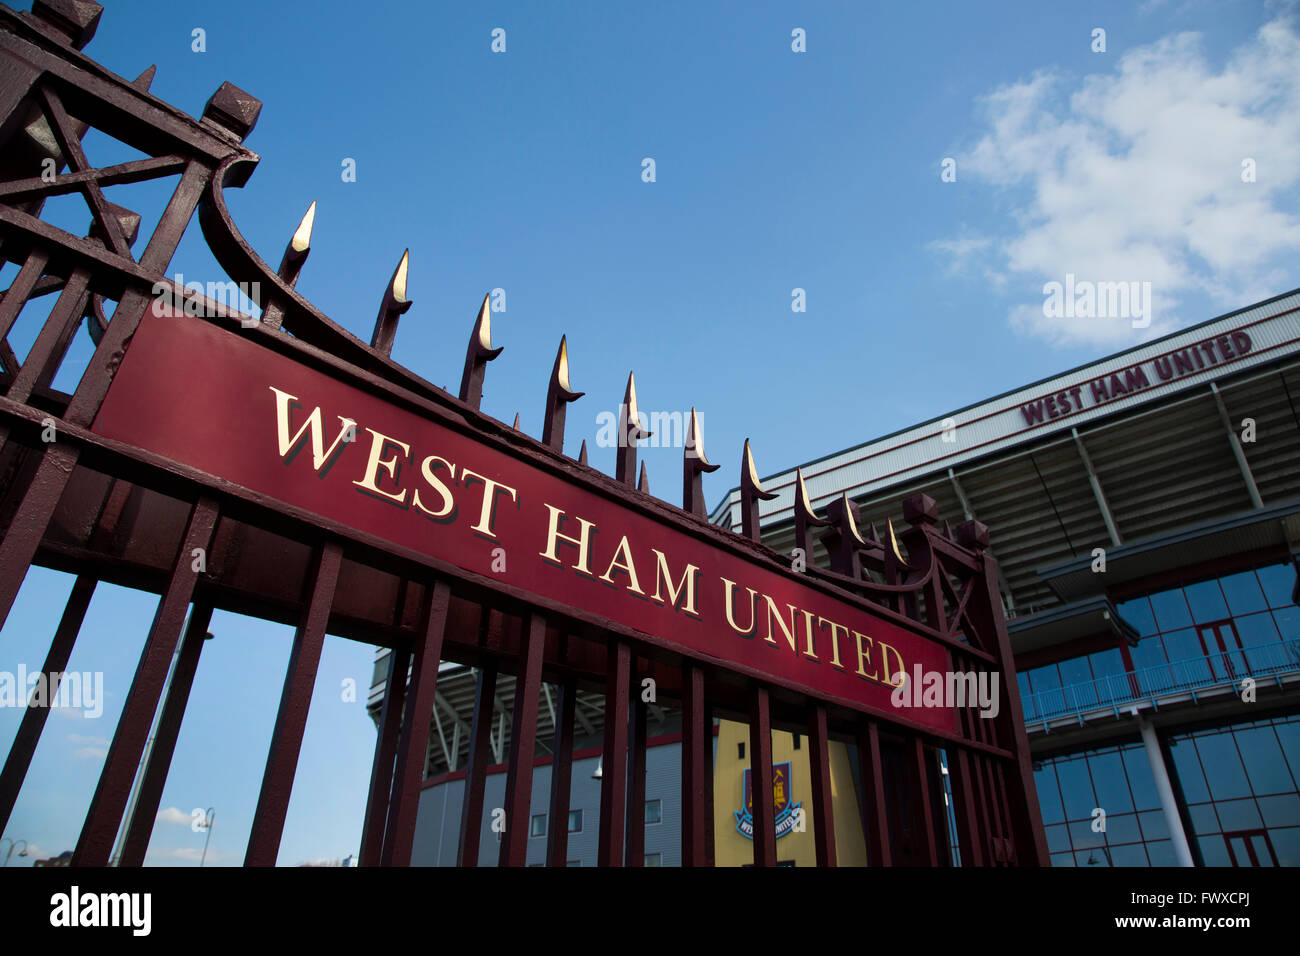 The John Lyall Gates at the entrance to the Boleyn Ground, pictured before West Ham United hosted Crystal Palace in a Barclays Premier League match. The Boleyn Ground at Upton Park was the club's home ground from 1904 until the end of the 2015-16 season when they moved into the Olympic Stadium, built for the 2012 London games, at nearby Stratford. The match ended in a 2-2 draw, watched by a near-capacity crowd of 34,857. Stock Photo